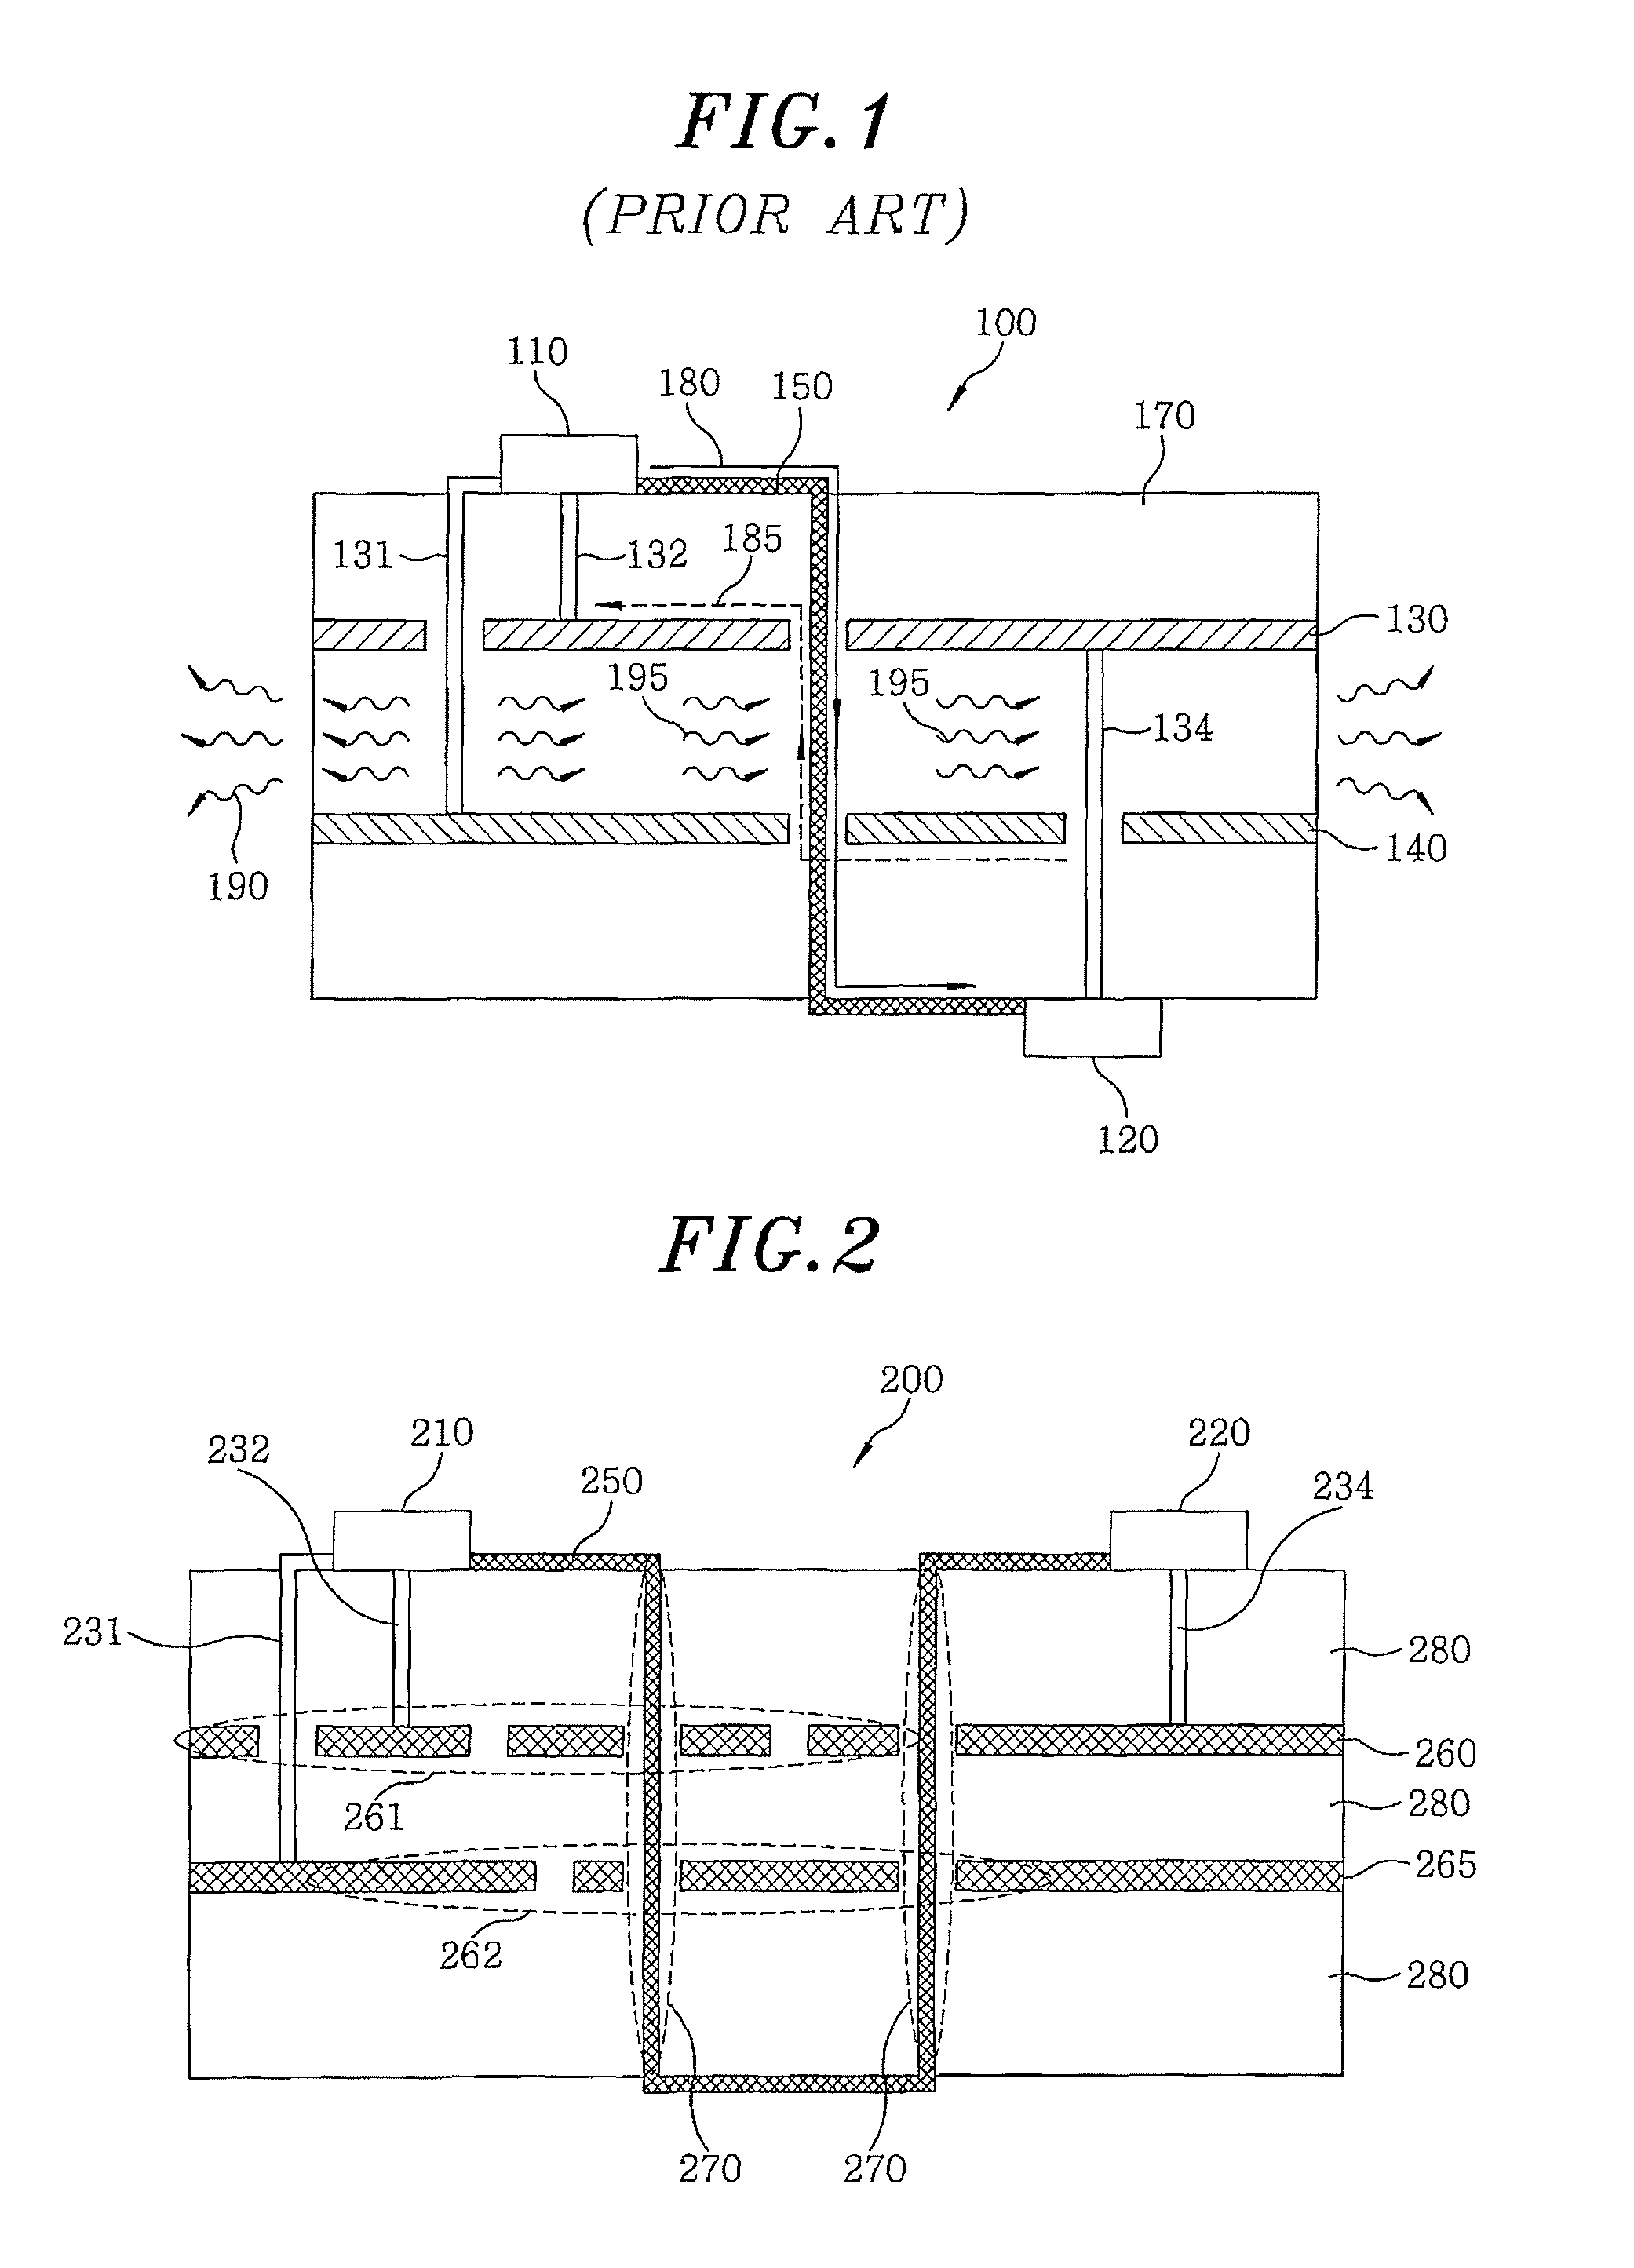 Arrangement structure of electromagnetic band-gap for suppressing noise and improving signal integrity